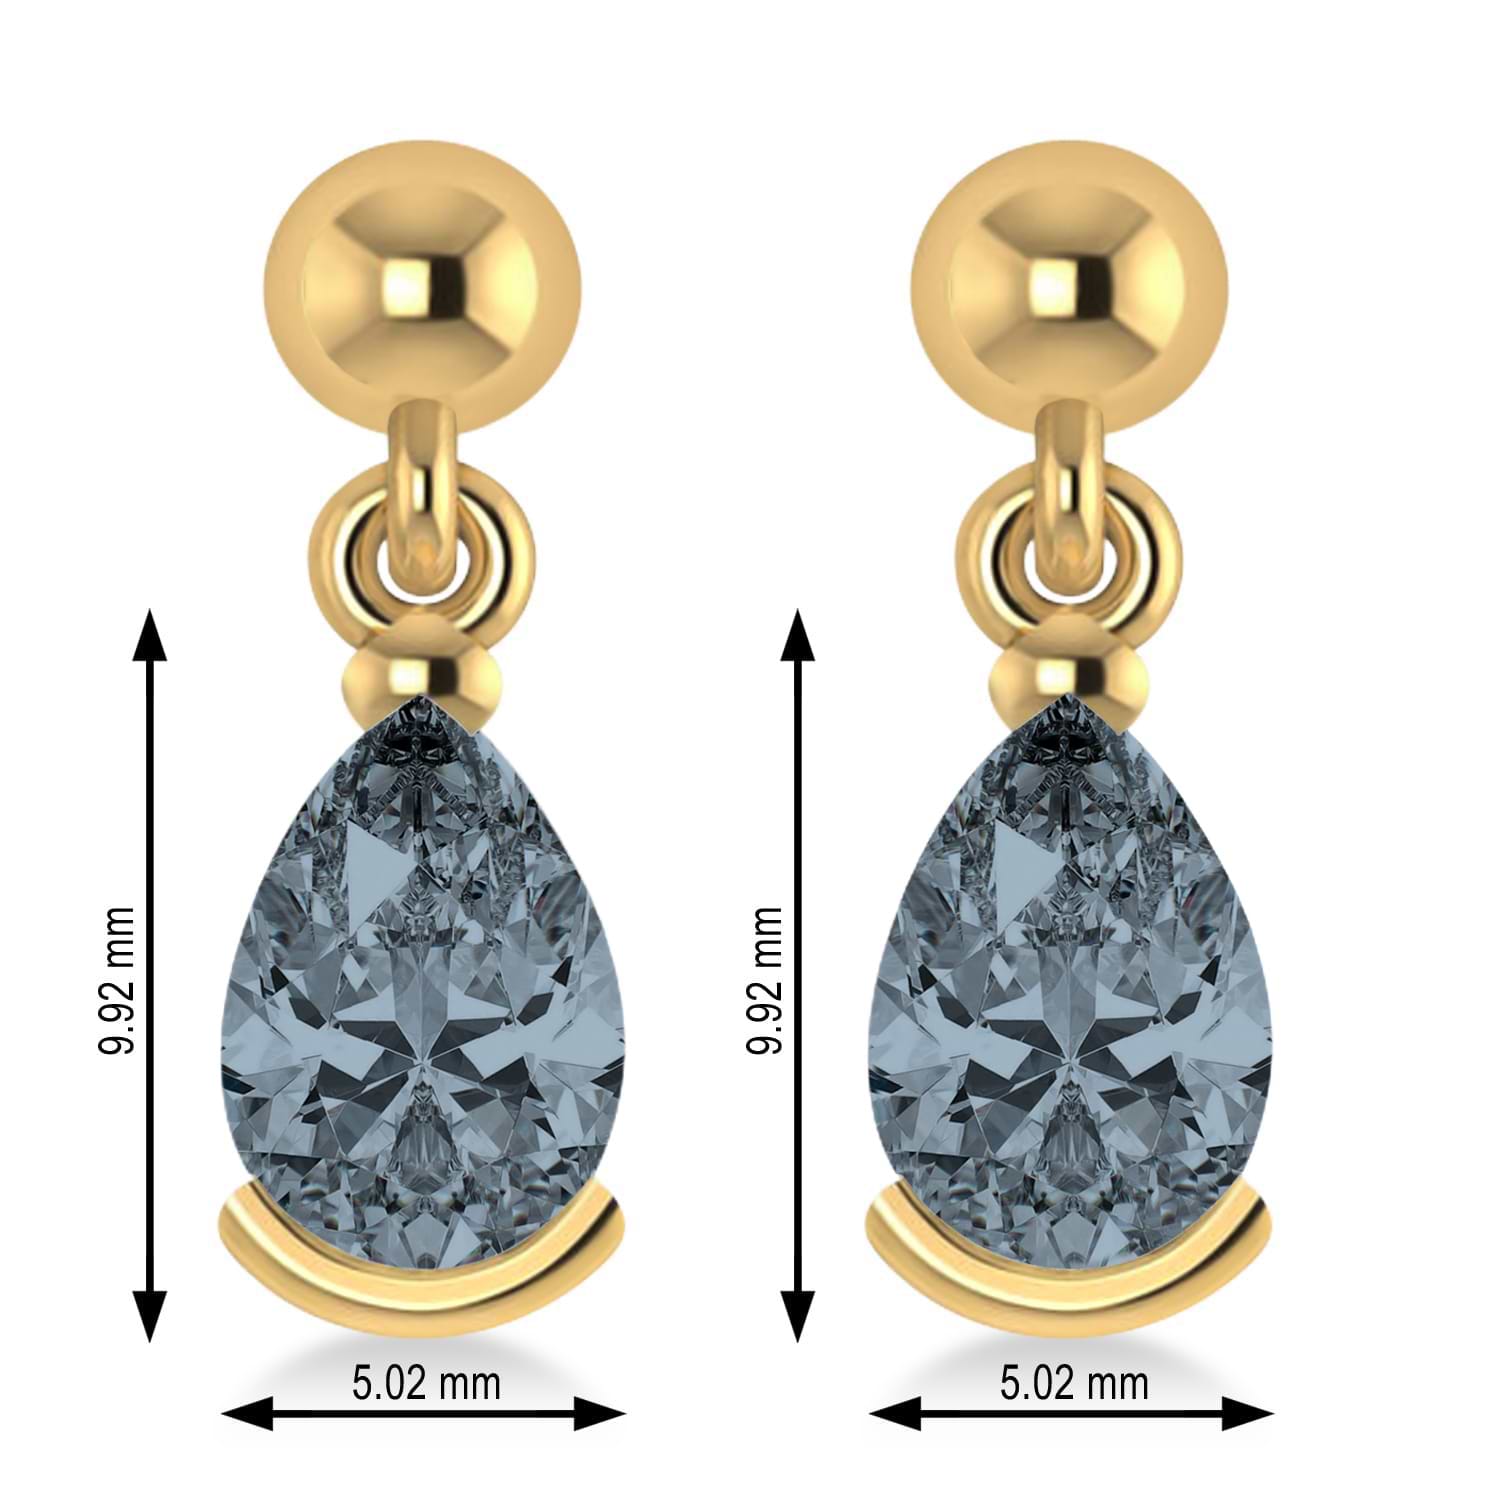 Gray Spinel Dangling Pear Earrings 14k Yellow Gold (2.00ct)